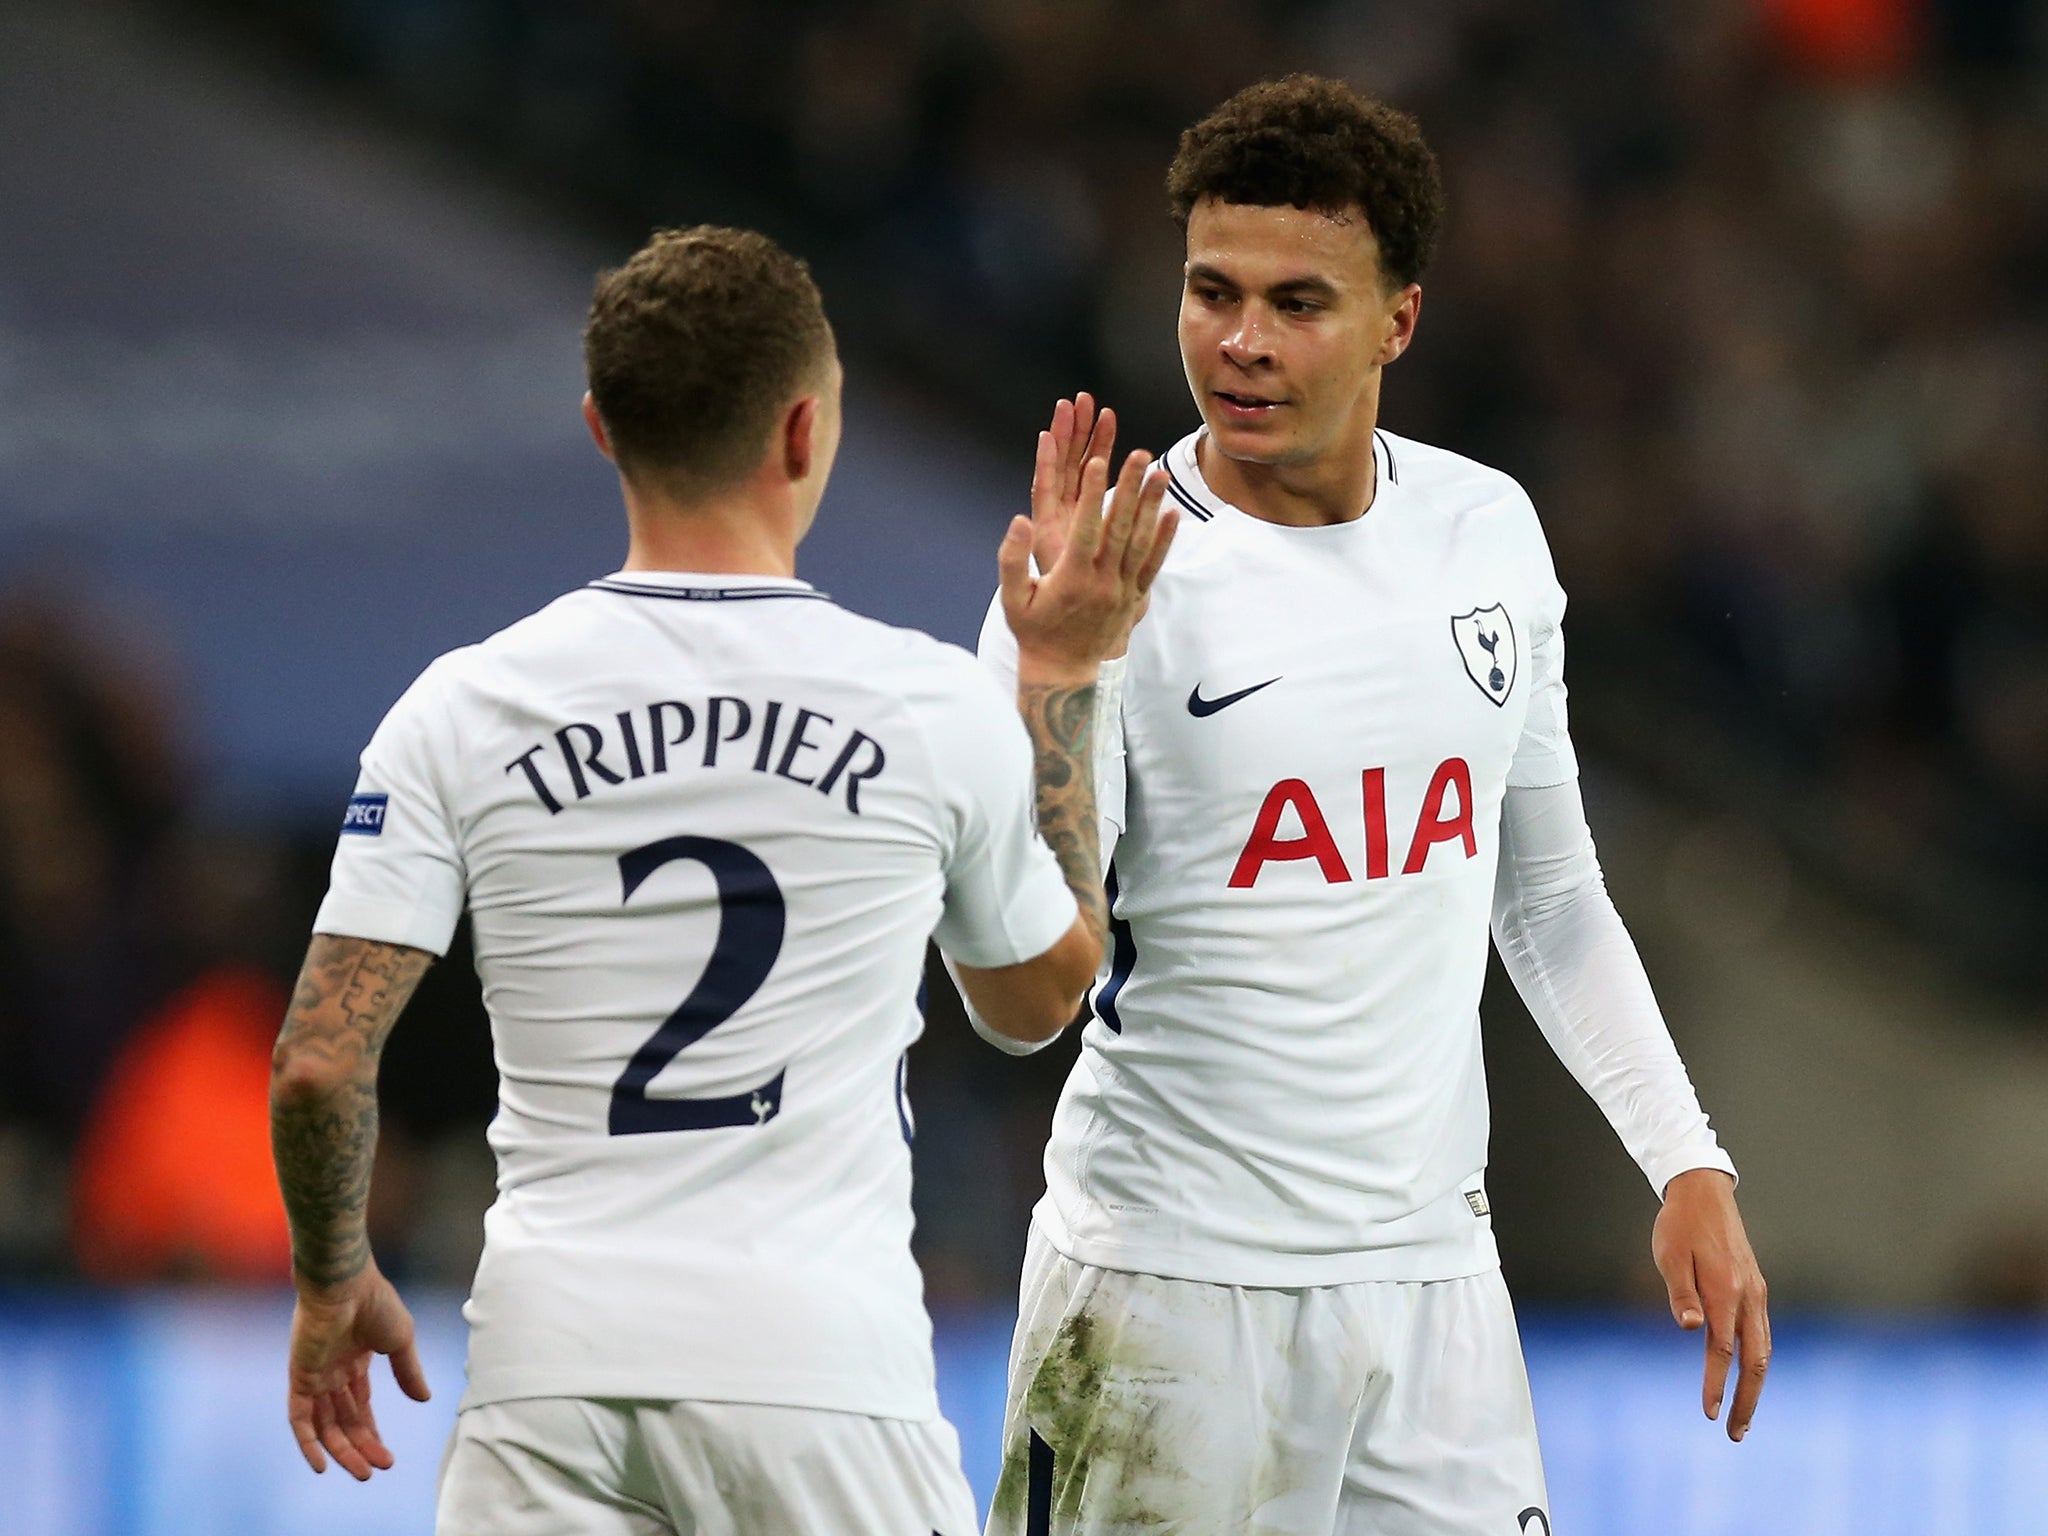 Dele Alli guided Tottenham to an emphatic 3-1 victory over Real Madrid